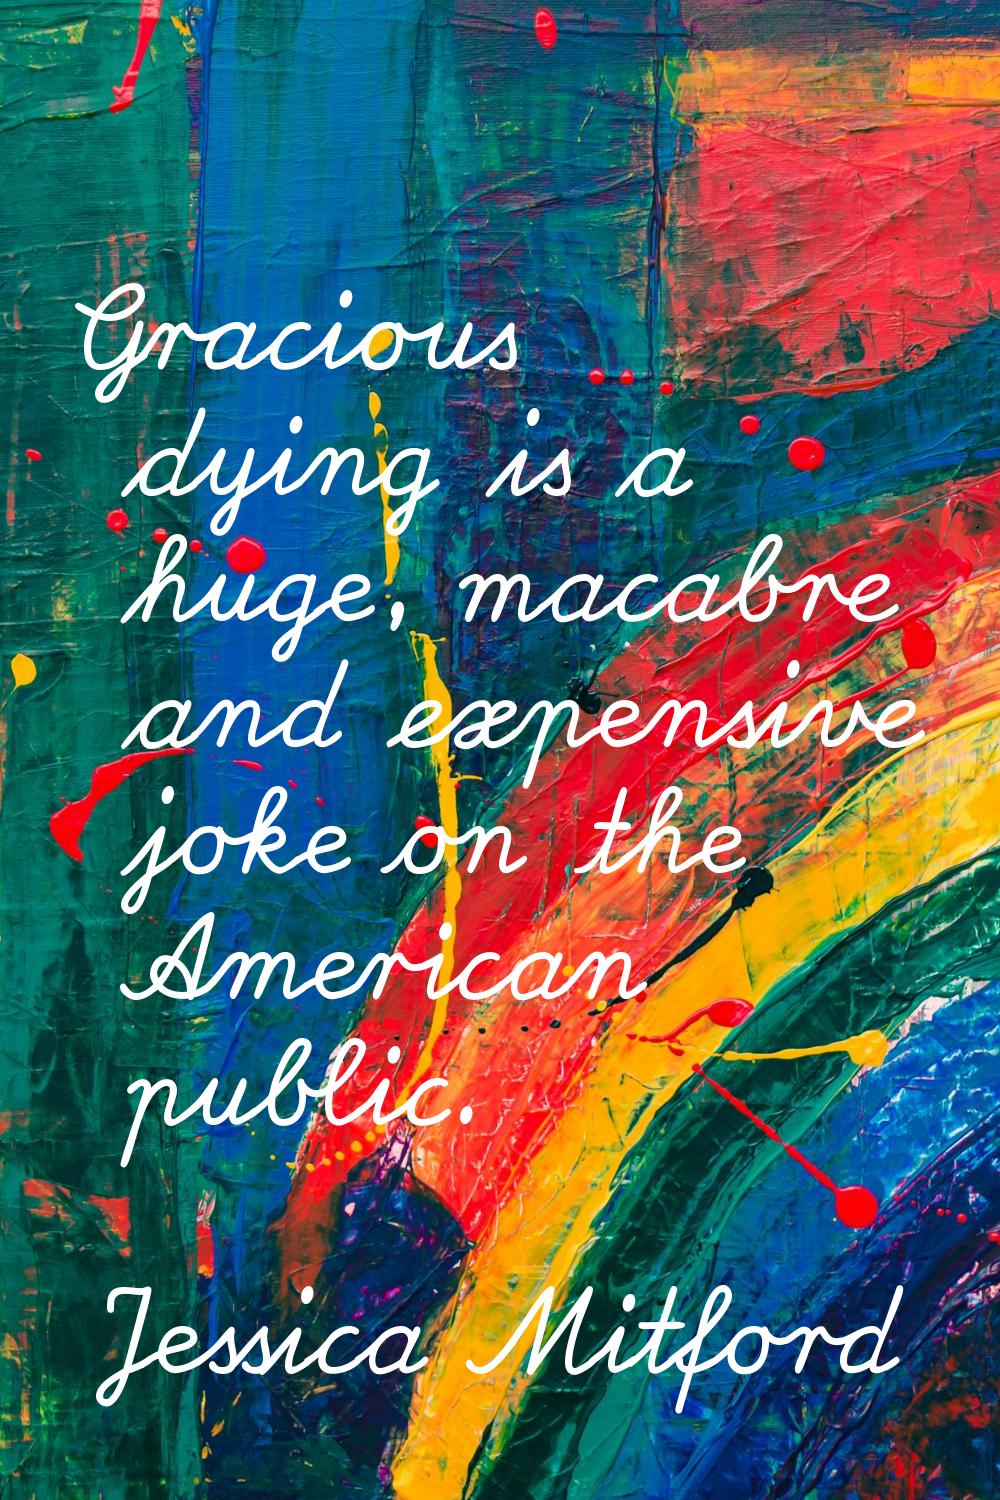 Gracious dying is a huge, macabre and expensive joke on the American public.